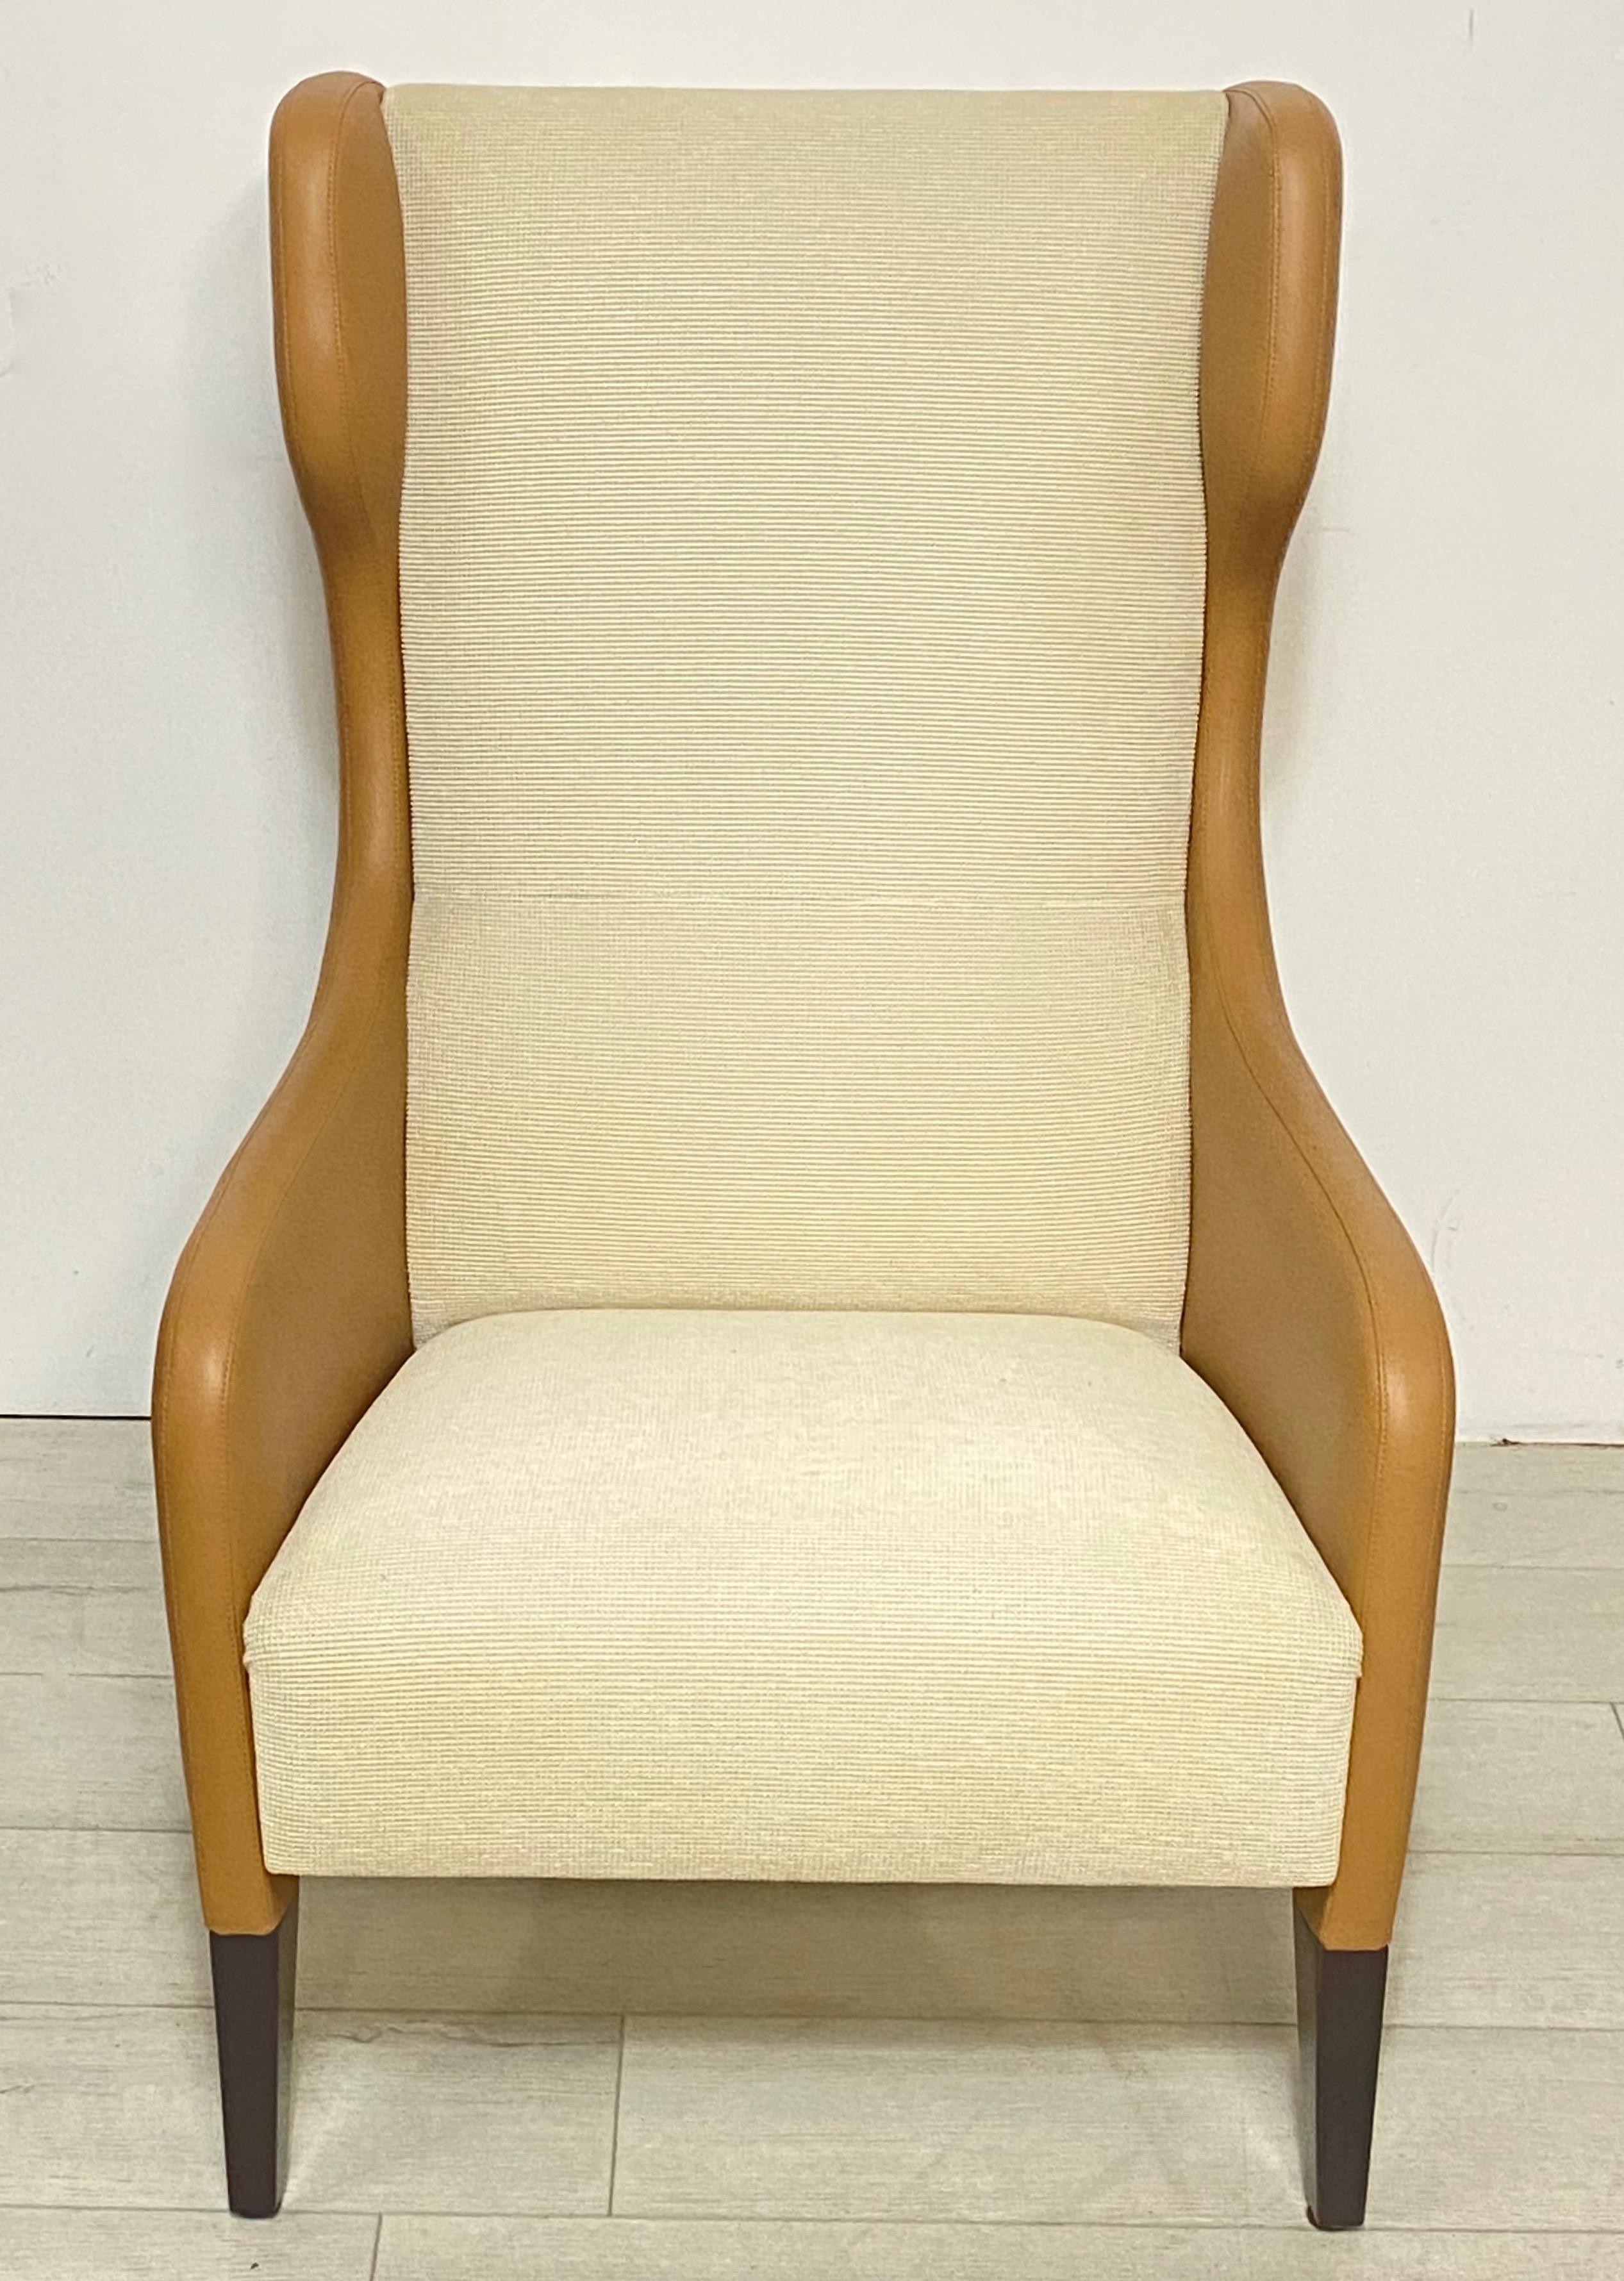 Pair of Modern Gio Ponti Style Leather and Upholstery Wingback Chairs In Good Condition For Sale In San Francisco, CA